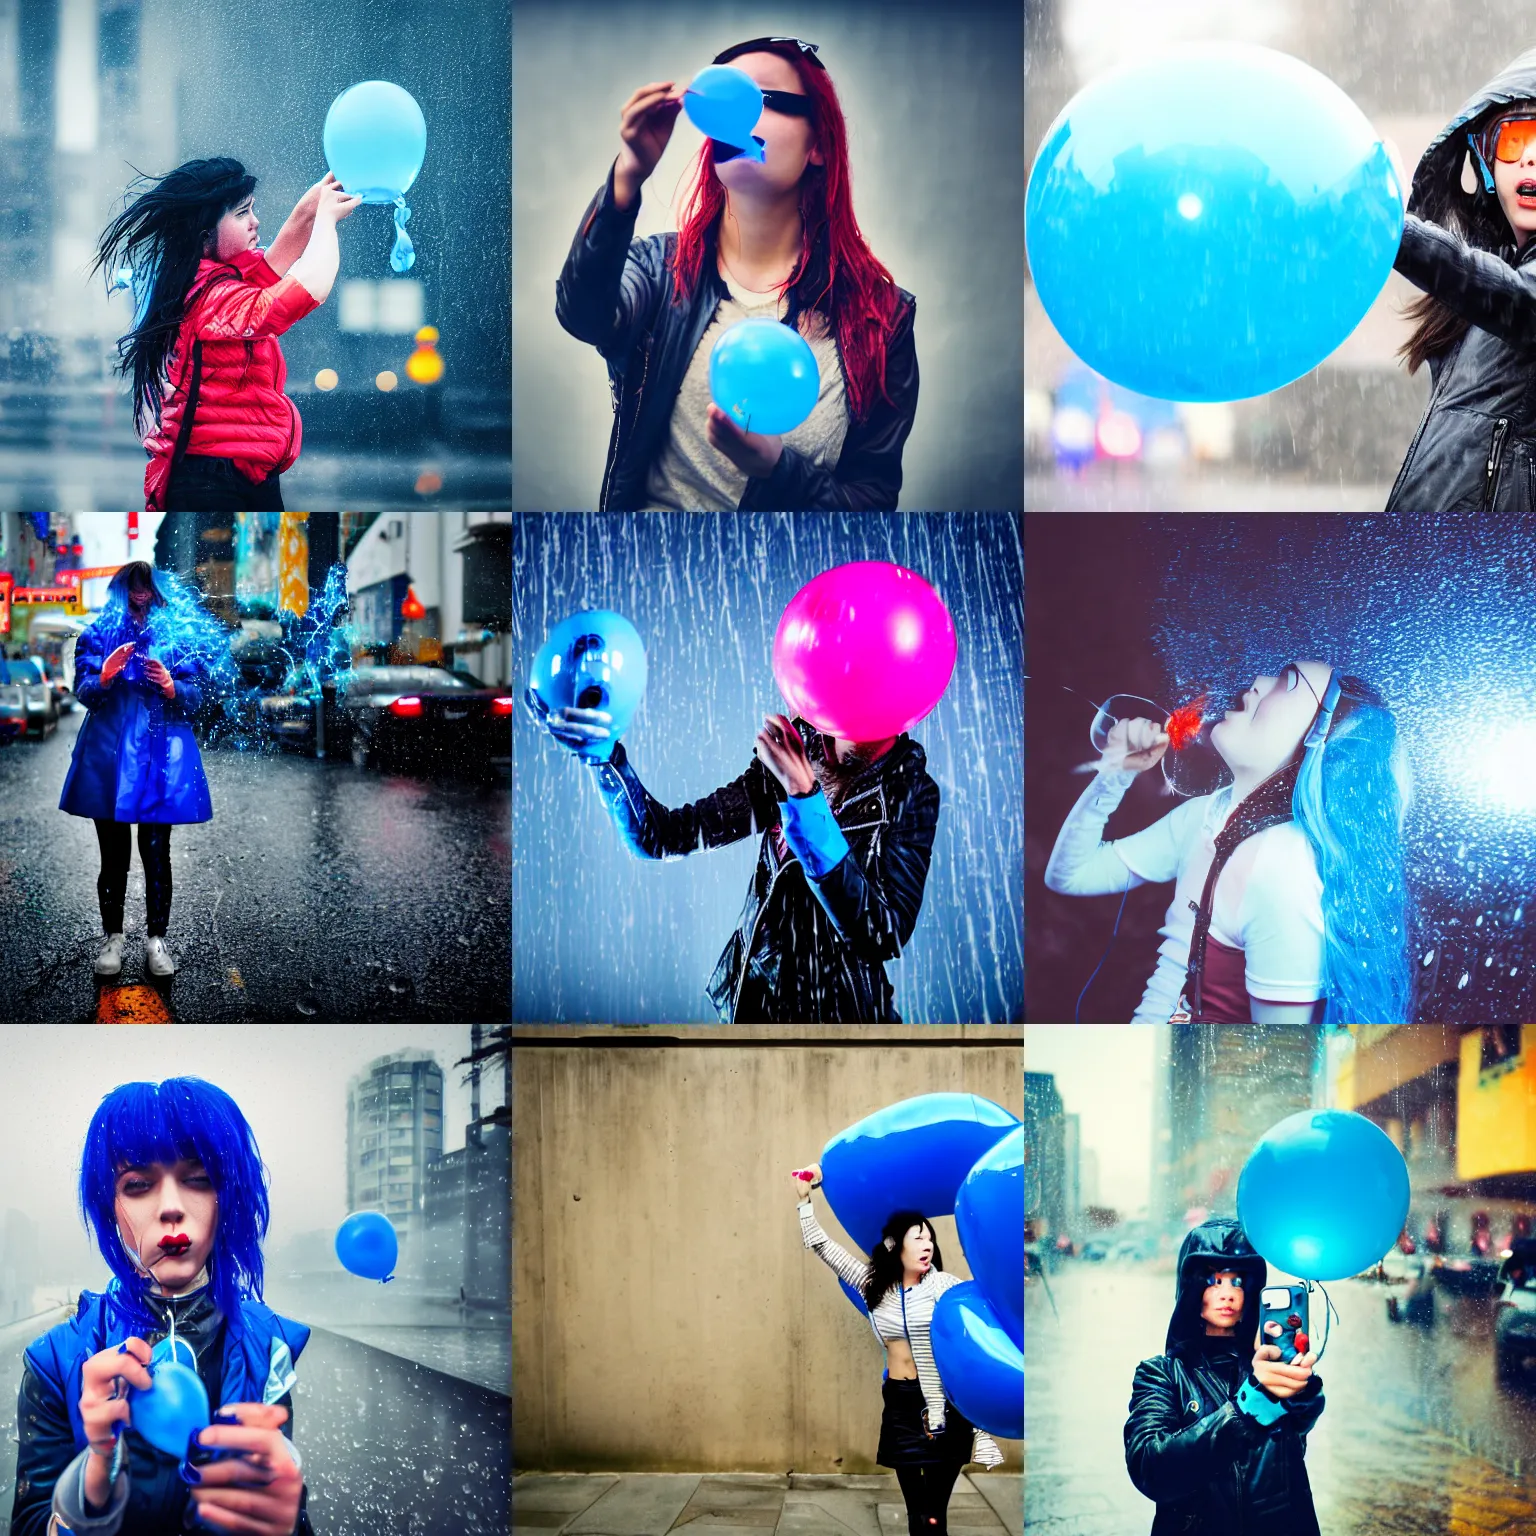 Prompt: Selfie of a cyberpunk girl blowing up a blue balloon in a rainy weather, Flickr photography